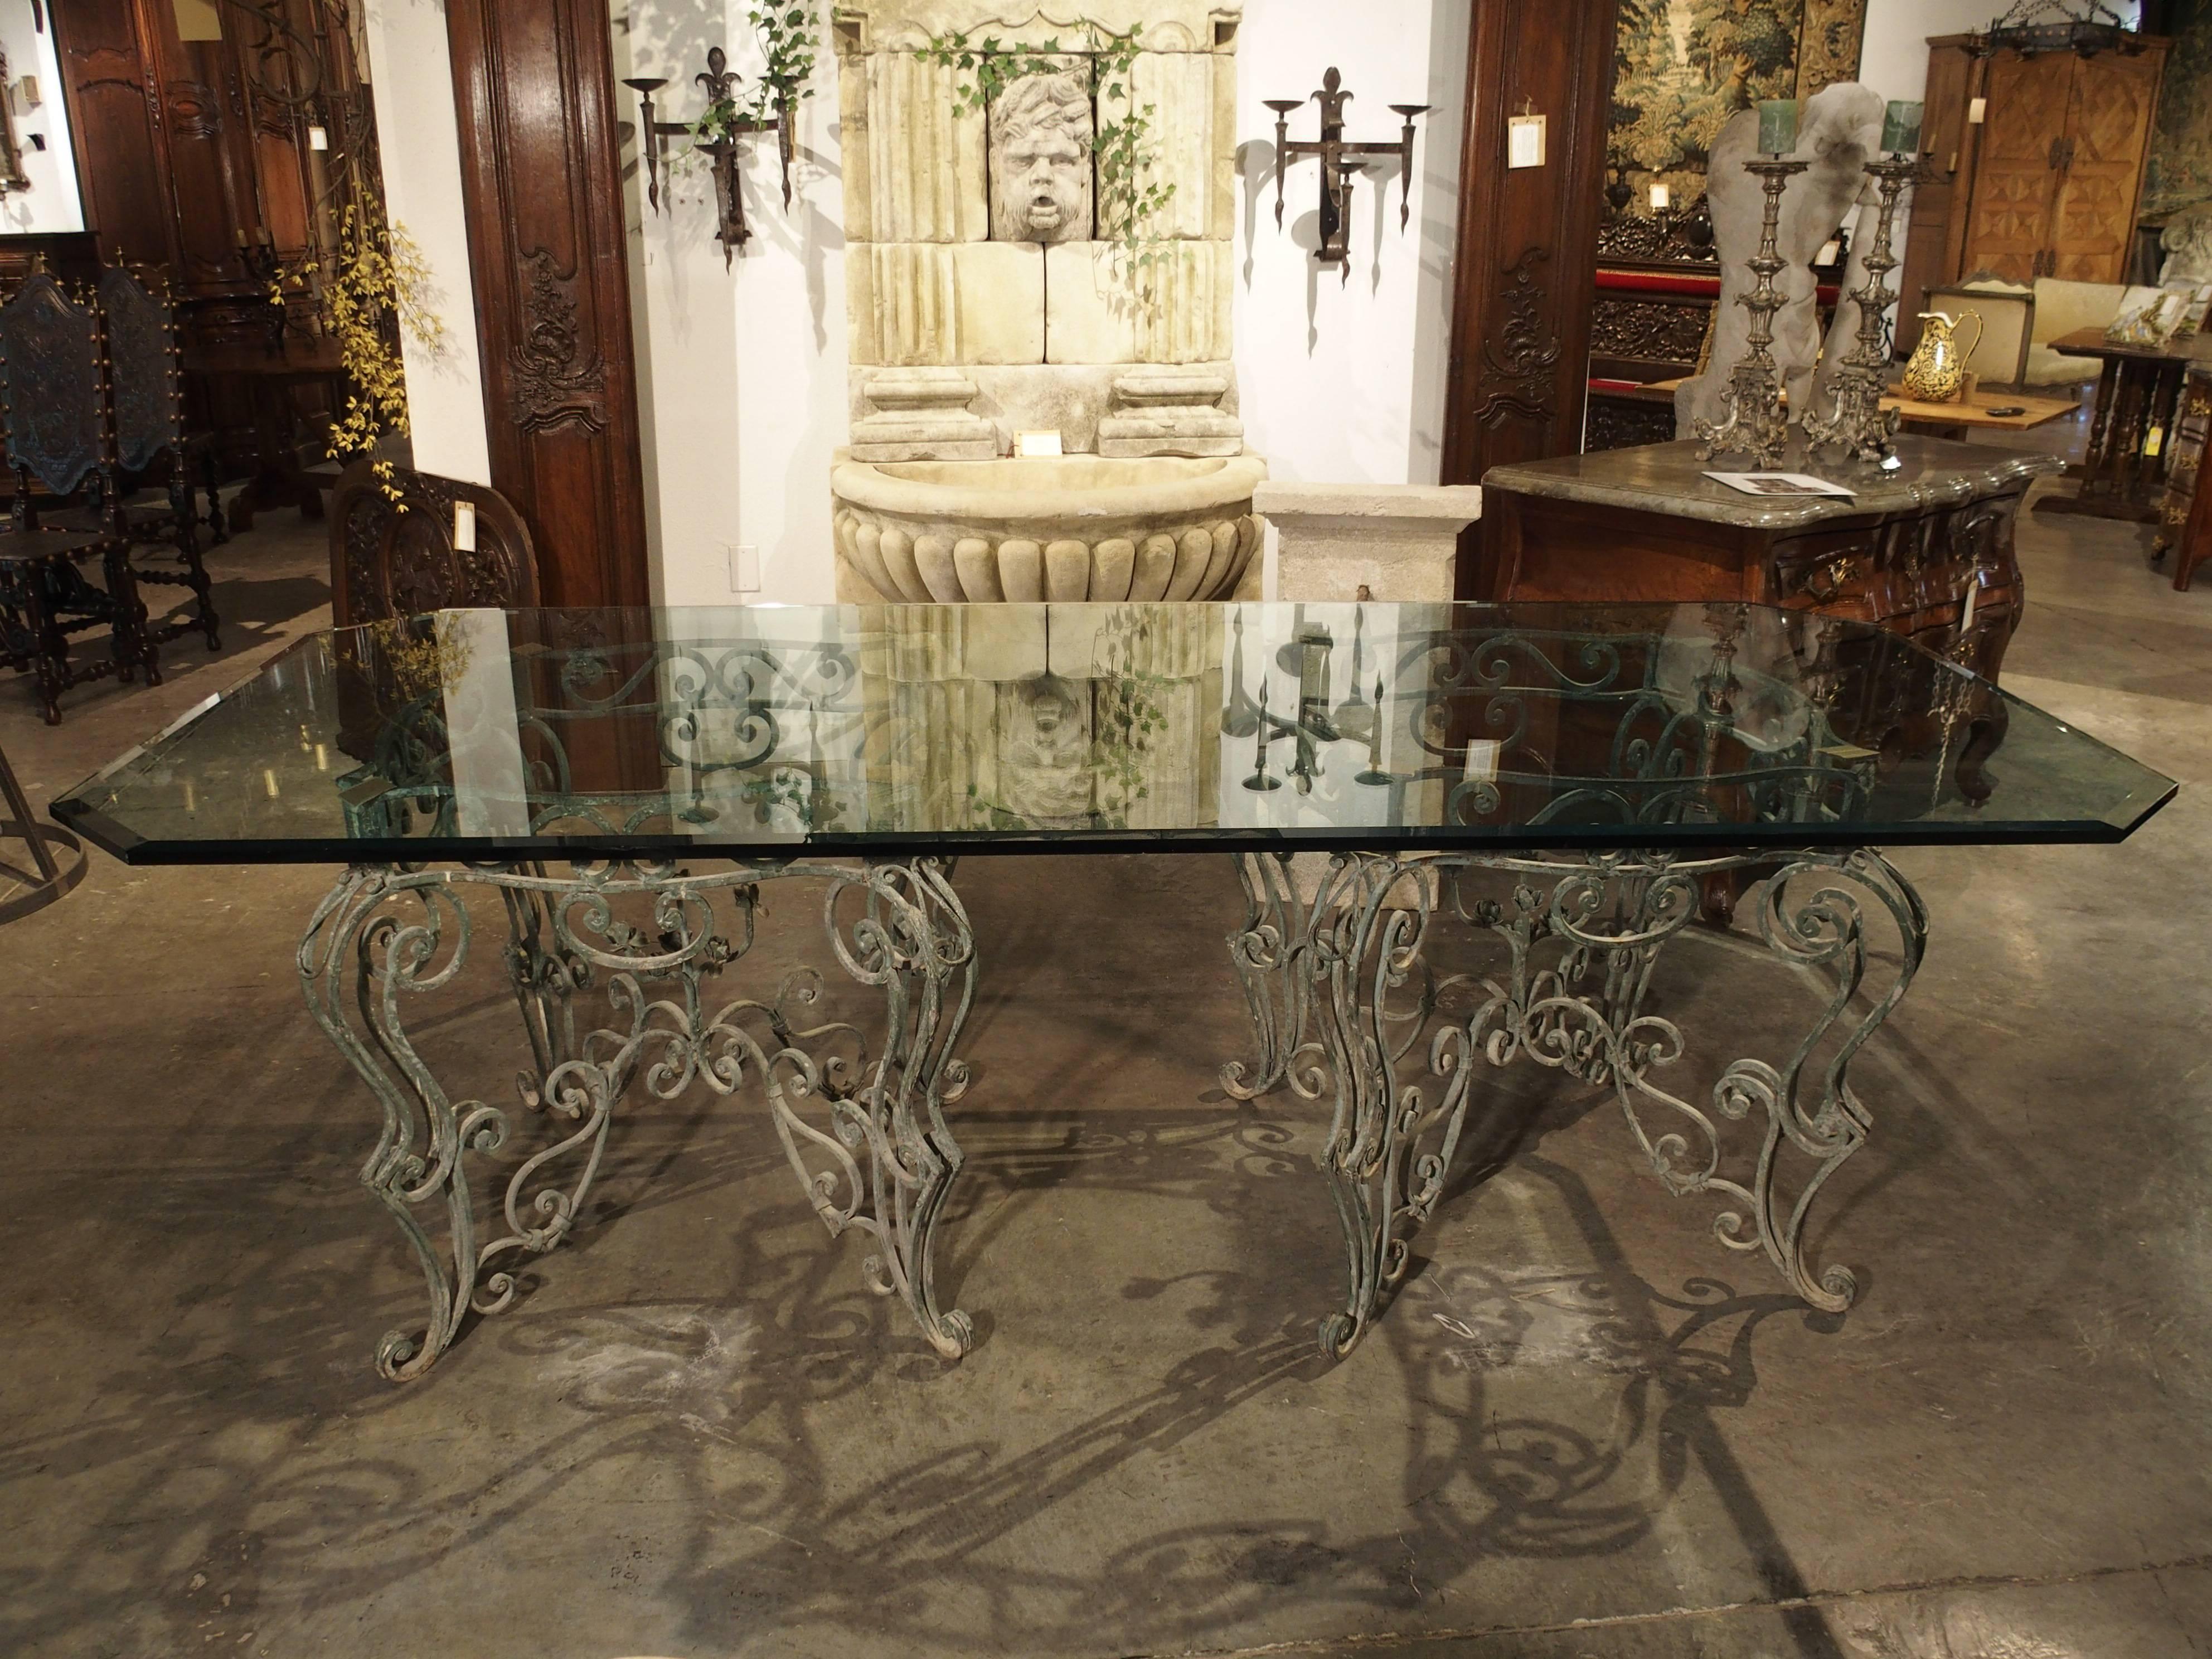 This glass topped table from France is supported by two patinated Verdigris iron bases. The bases are square with an abundance of open worked C and S scrolls. At the centre of each base, there are iron bouquets of seven roses each. On the apron are